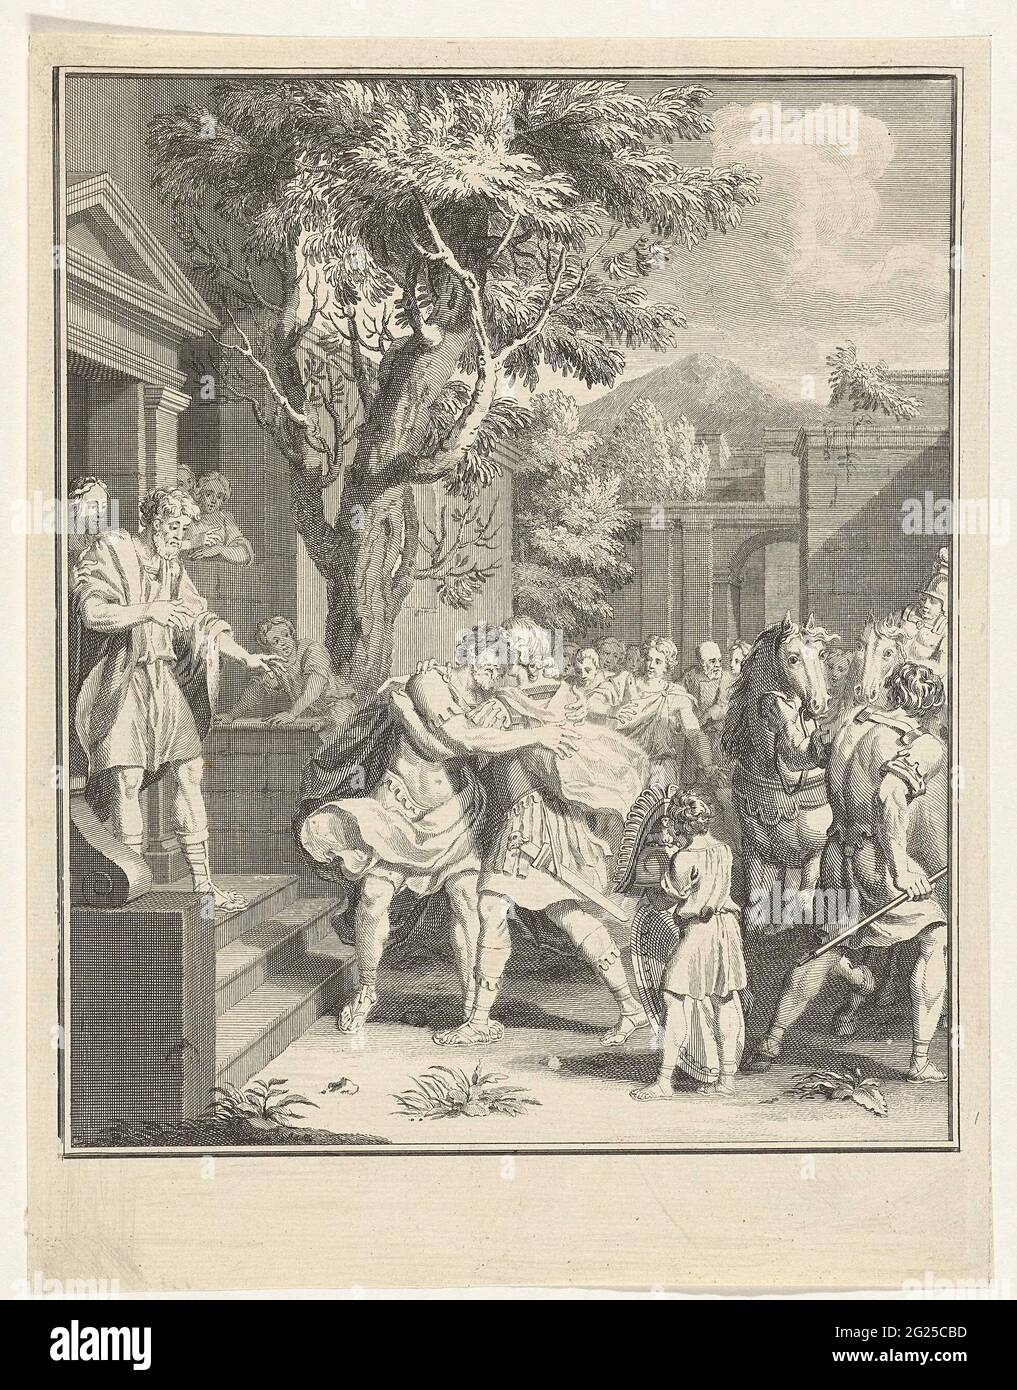 Telemachus and Nestor in embrace; Adventures of Telemachus. Surrounded by bystanders, Telemachus and Nestor embrace each other. On the left state Telemachus' Horse and in the foreground its arms equipment is held by a boy. Illustration manufactured by a story from 'Adventures of Telemachus', written by François de Fénélon. Stock Photo